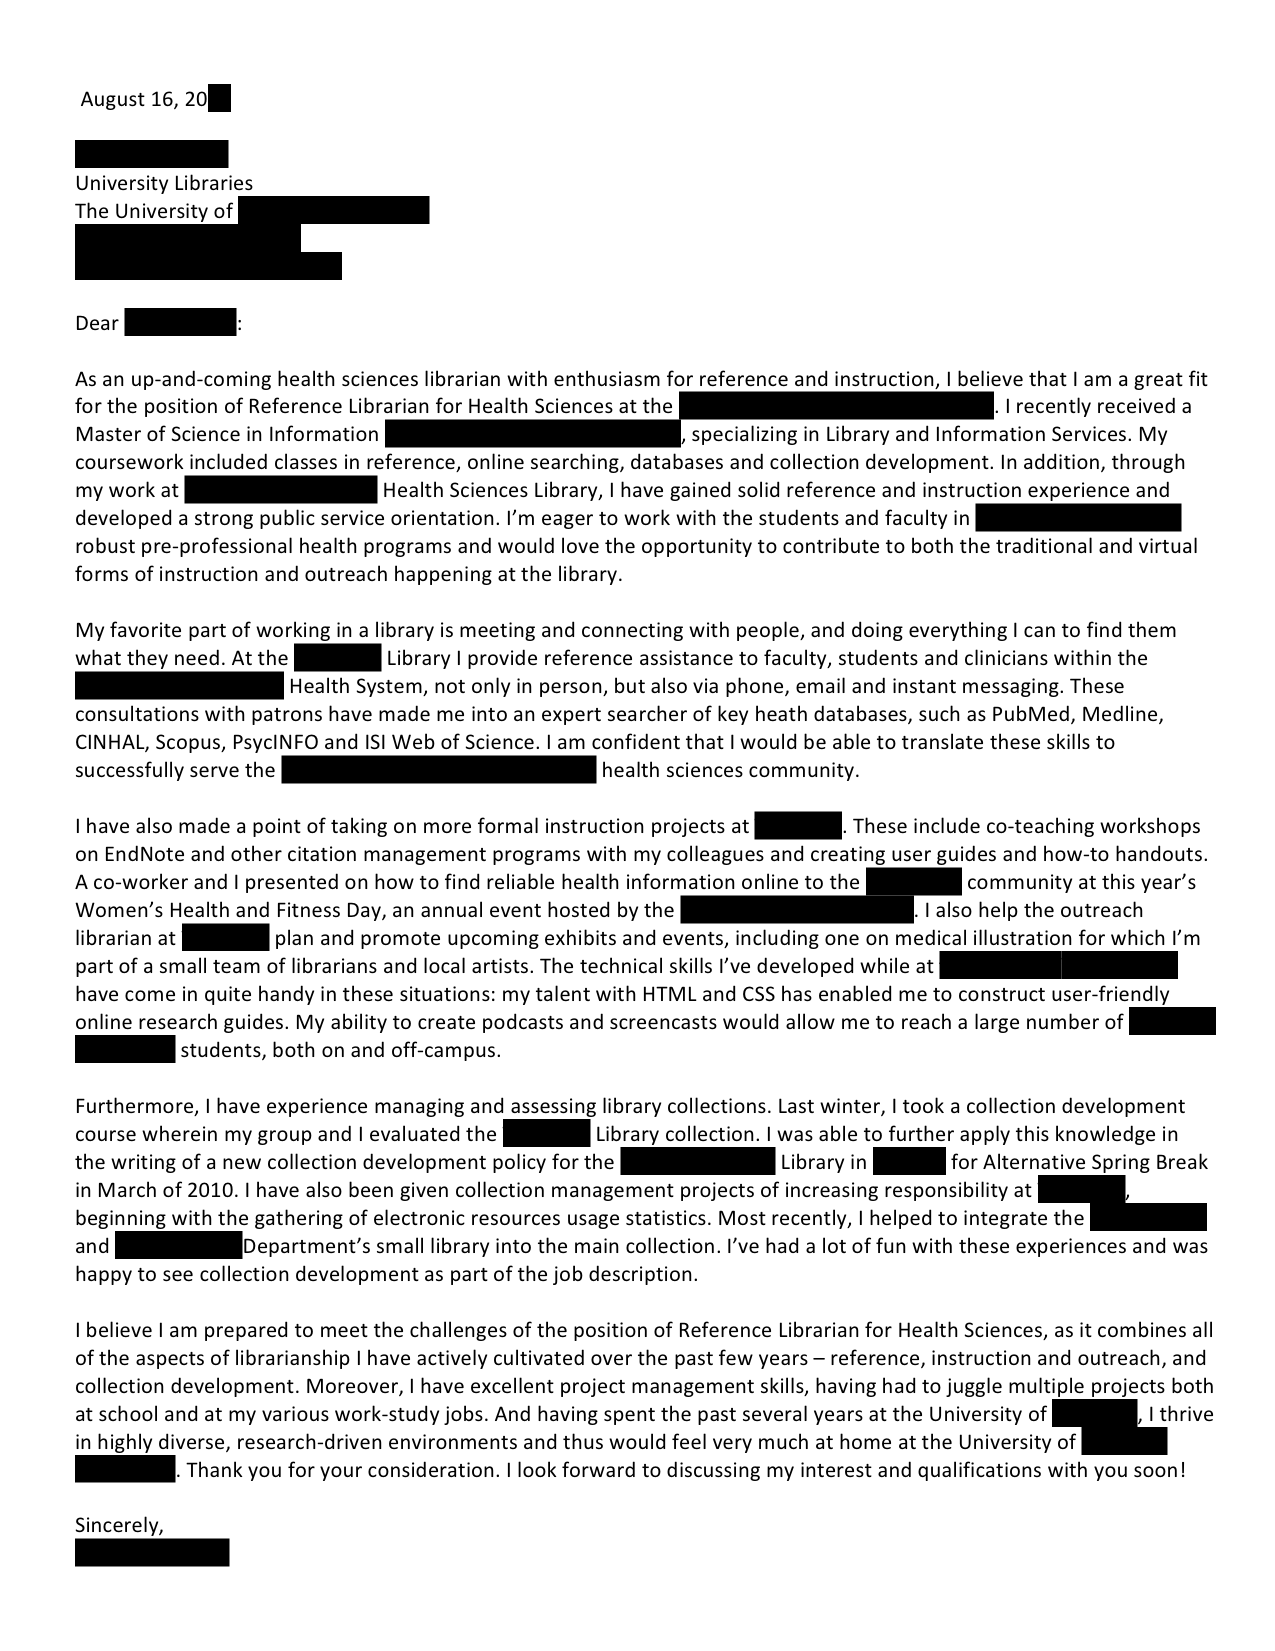 letter of recommendation example reddit